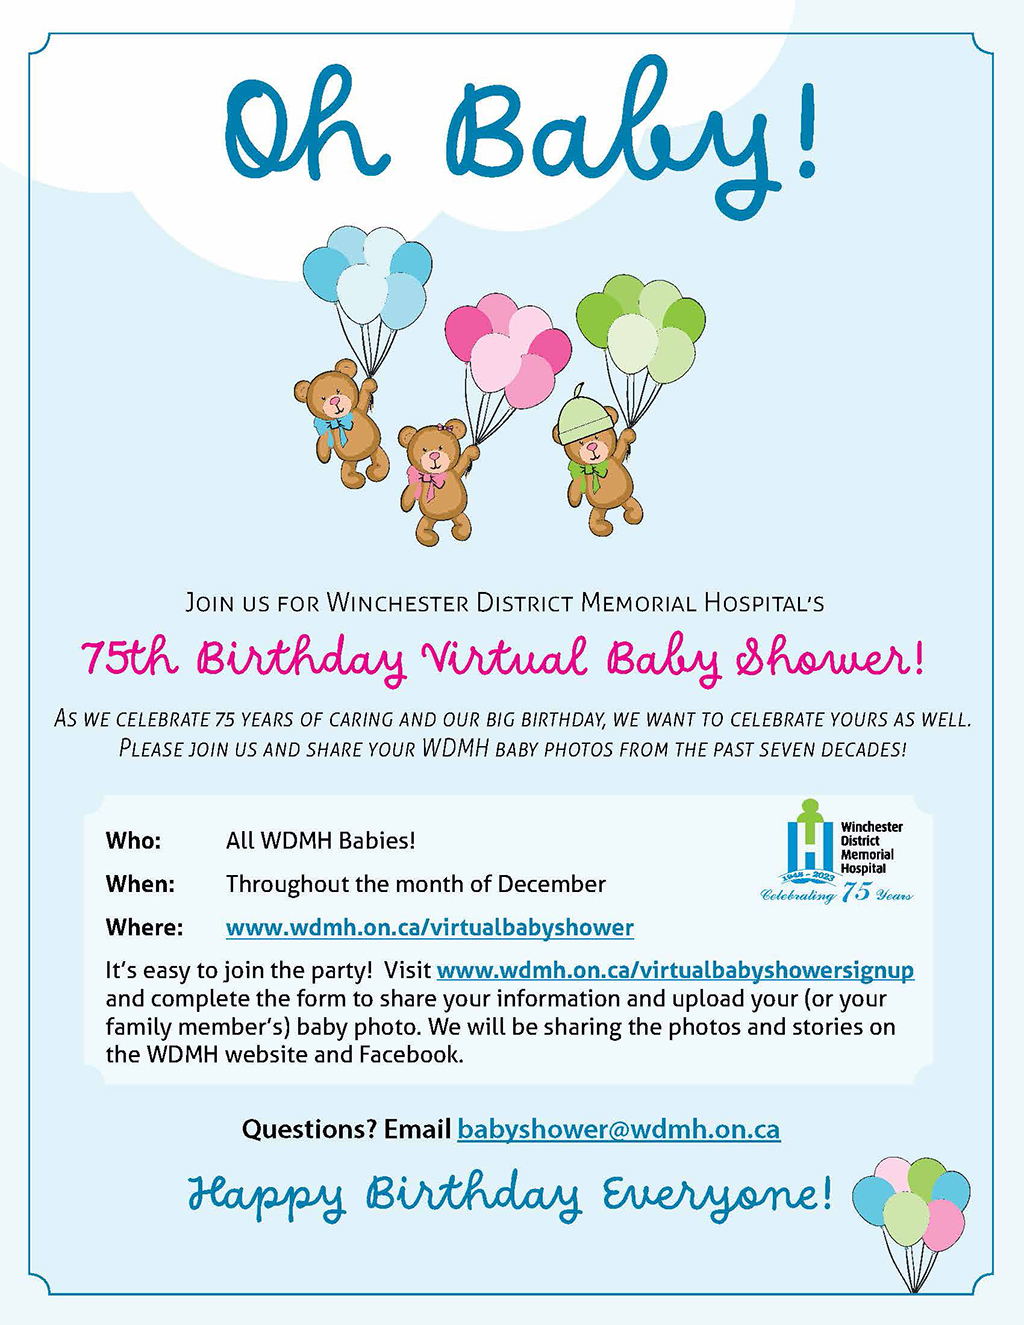 Oh Baby! Join us for WDMH’s 75th Birthday Virtual Baby Shower!